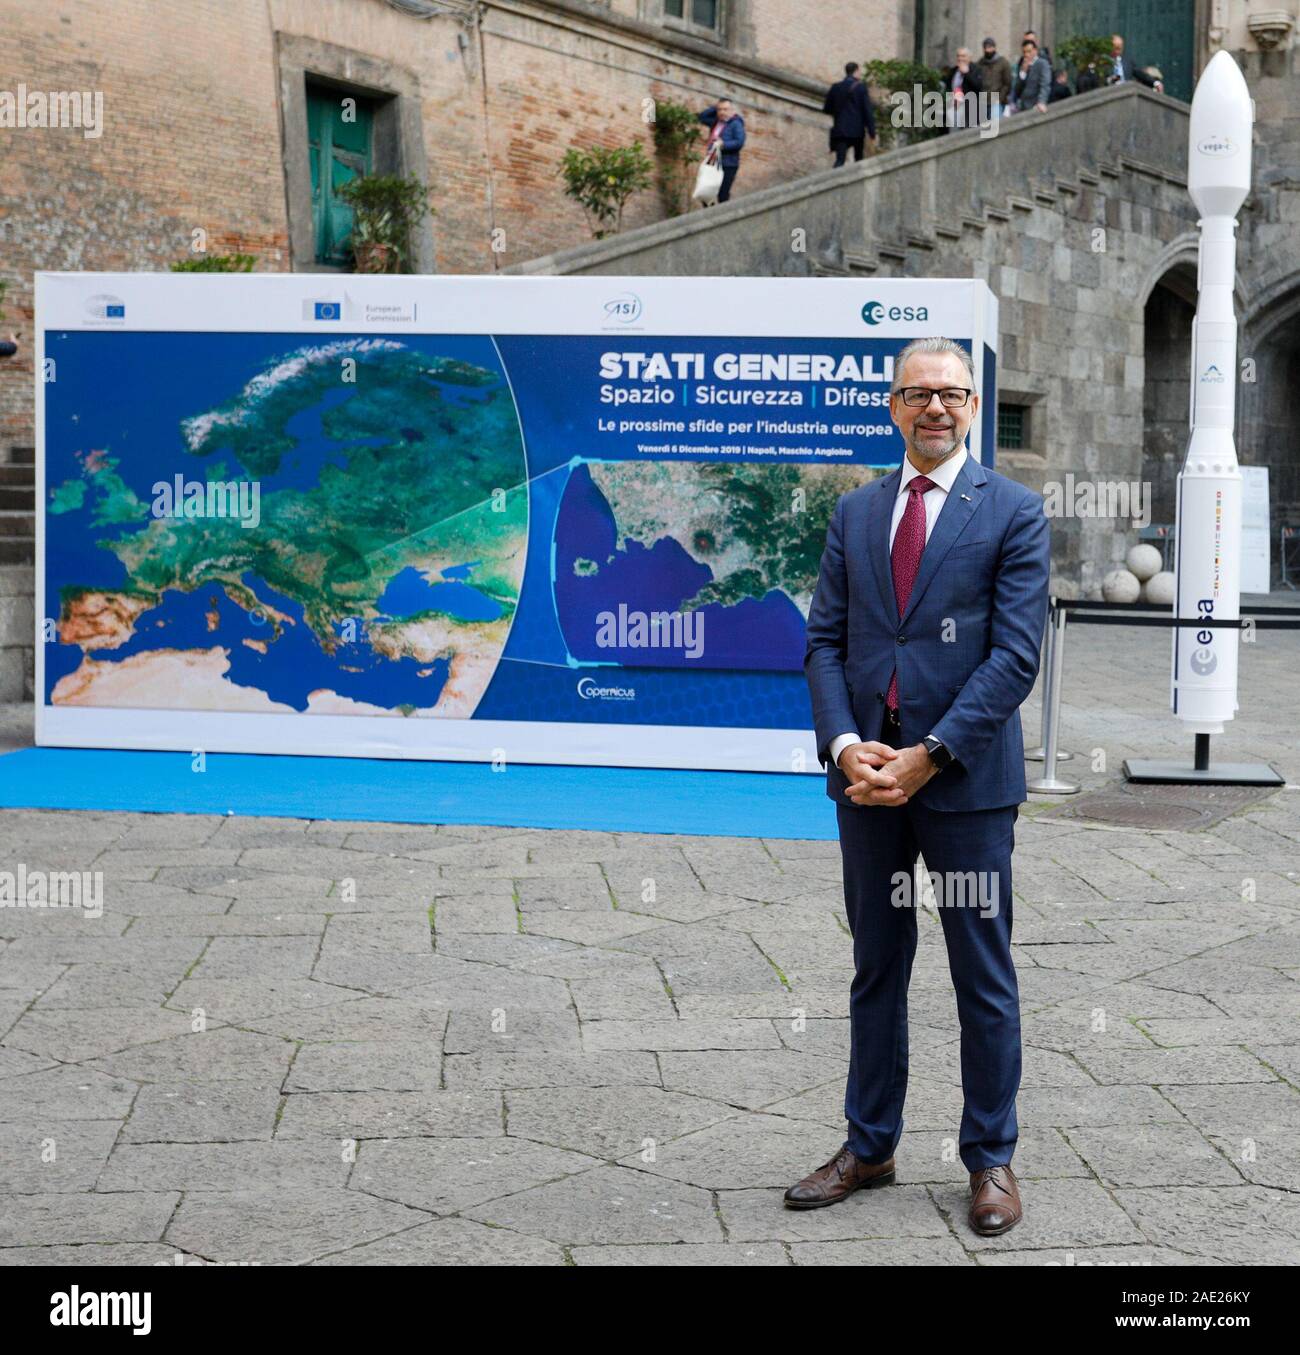 Naples, Campania, Italy. 6th Dec, 2019. 12/06/2019 Naples, conference General States of Space, Security and Defense with the presence of the President of the European Parliament David Sassoli and Ministers of the Italian Republic. Credit: Fabio Sasso/ZUMA Wire/Alamy Live News Stock Photo